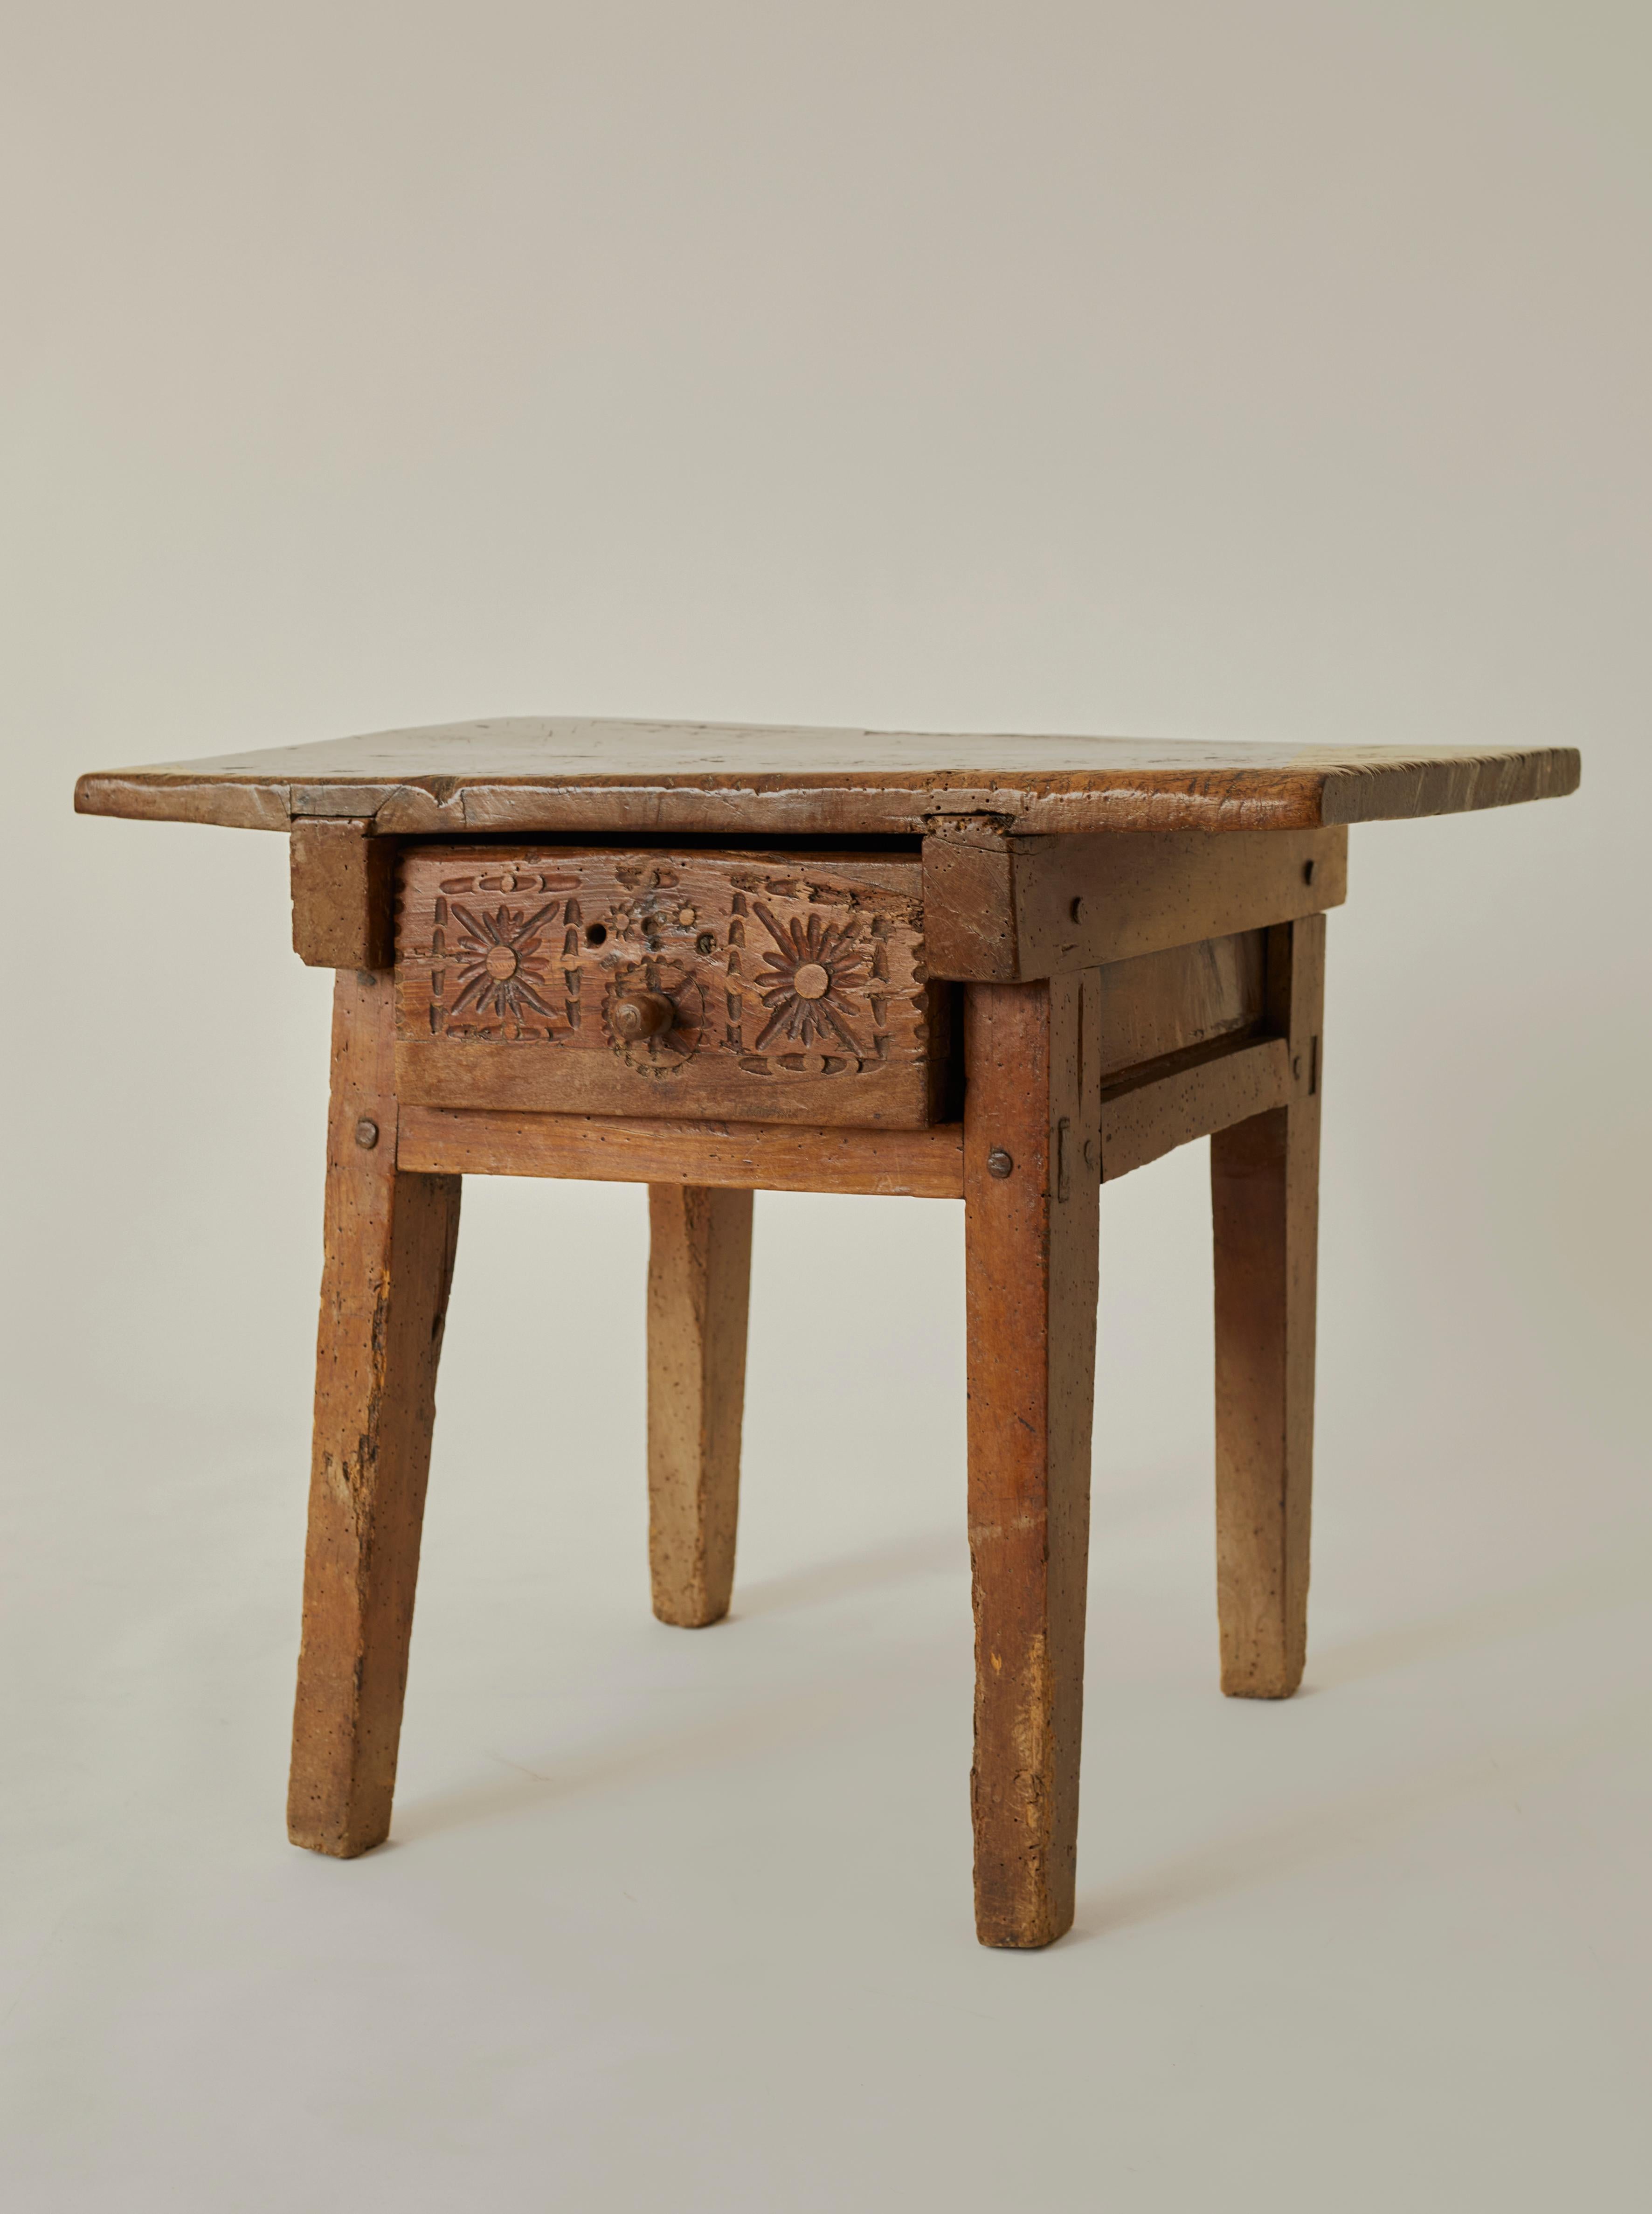 A heavy Spanish 18th century kitchen work table in solid walnut. The table features a beautifully hand-carved drawer and a heavily patinated, buttery-soft top. 

NOTE: The table is wobbly when moved, but otherwise stands steady and can support heavy